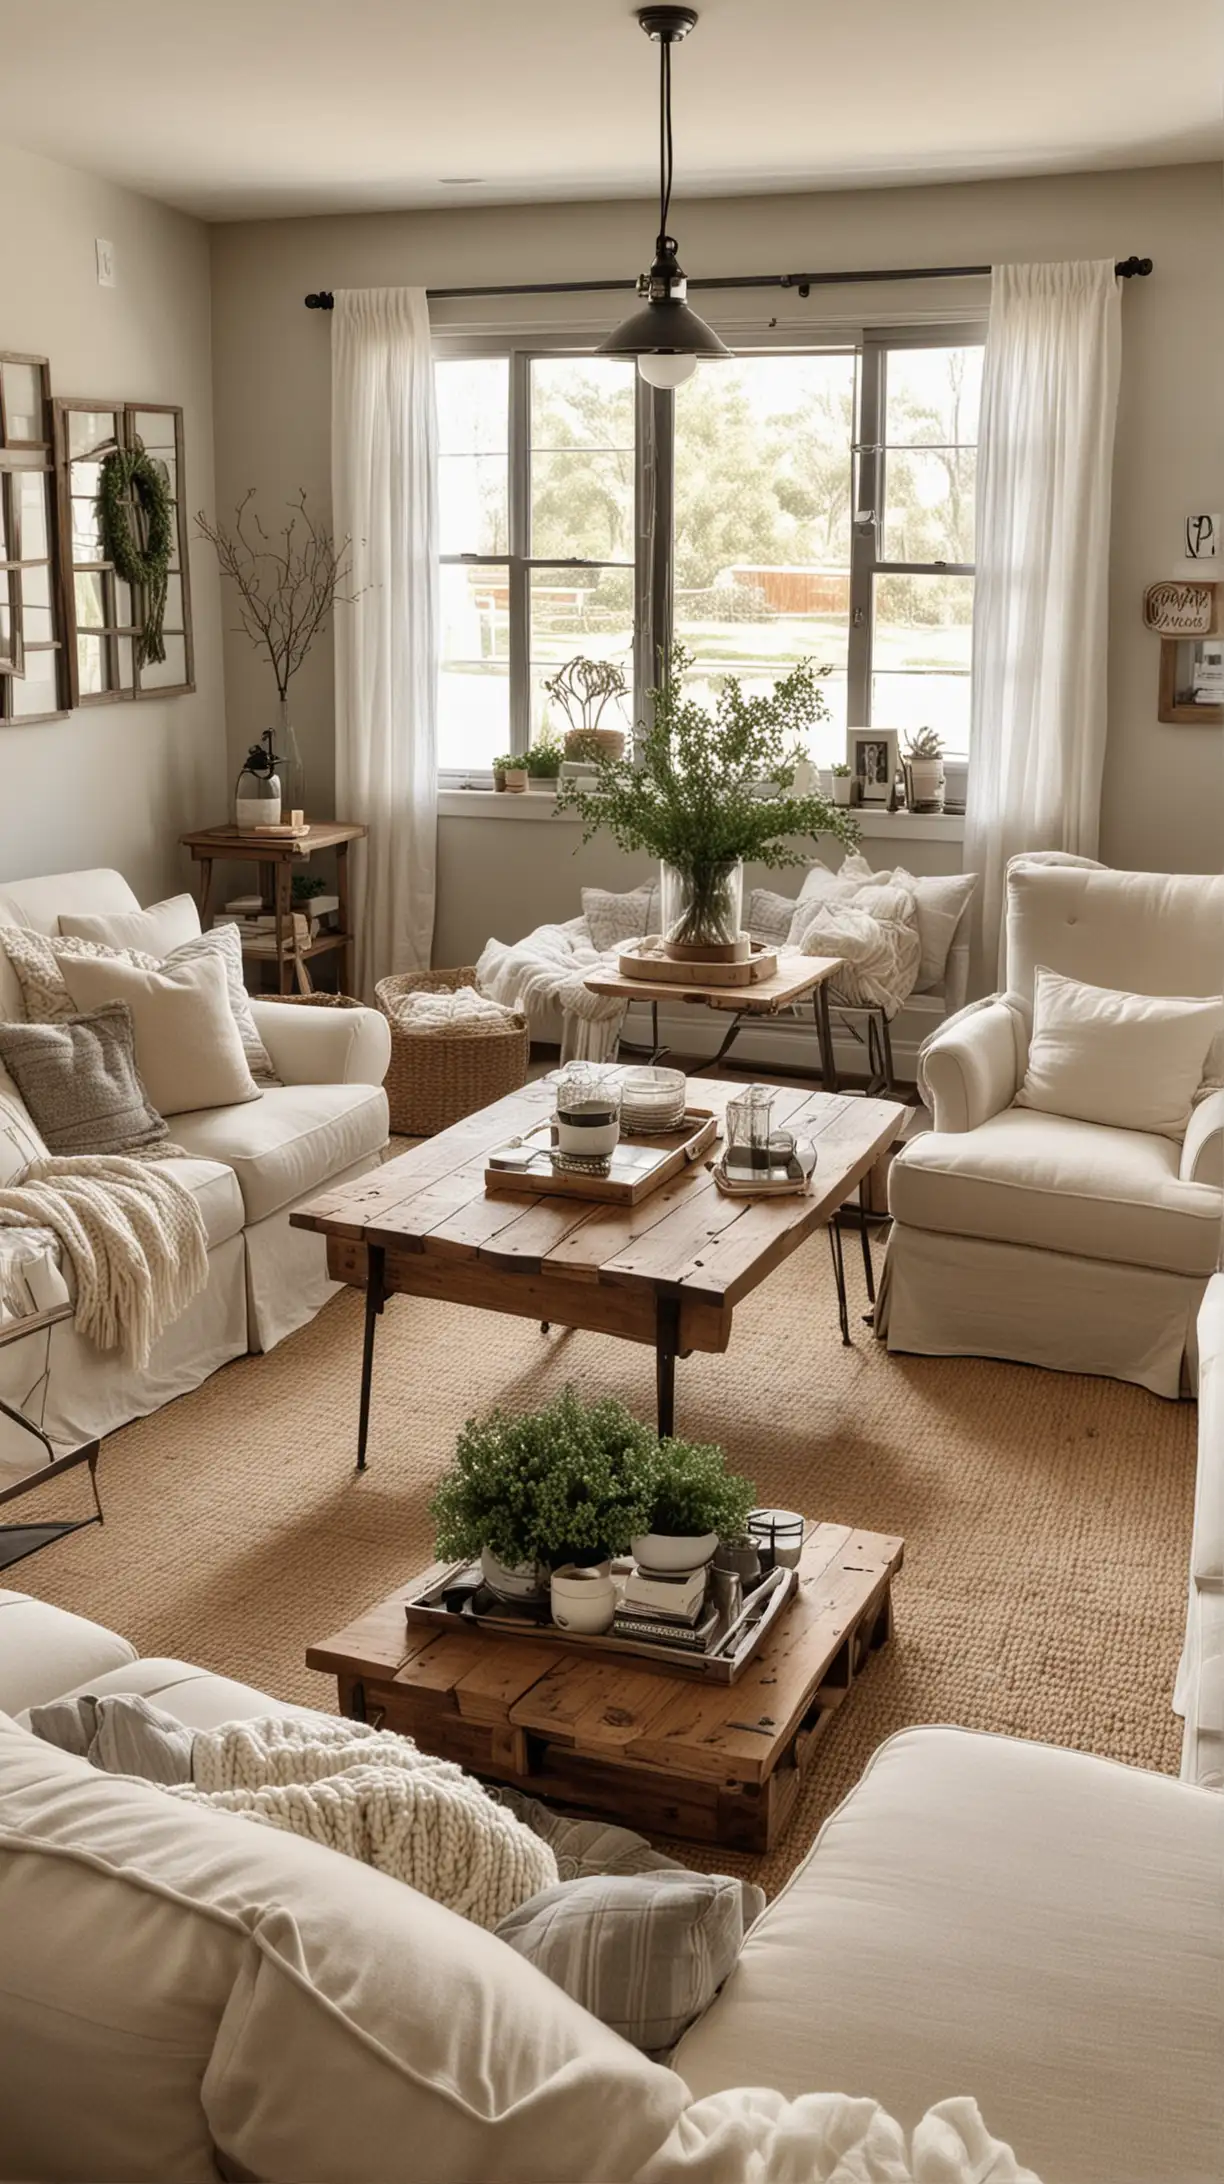 Rustic Farmhouse Living Room with Cozy Seating Arrangement